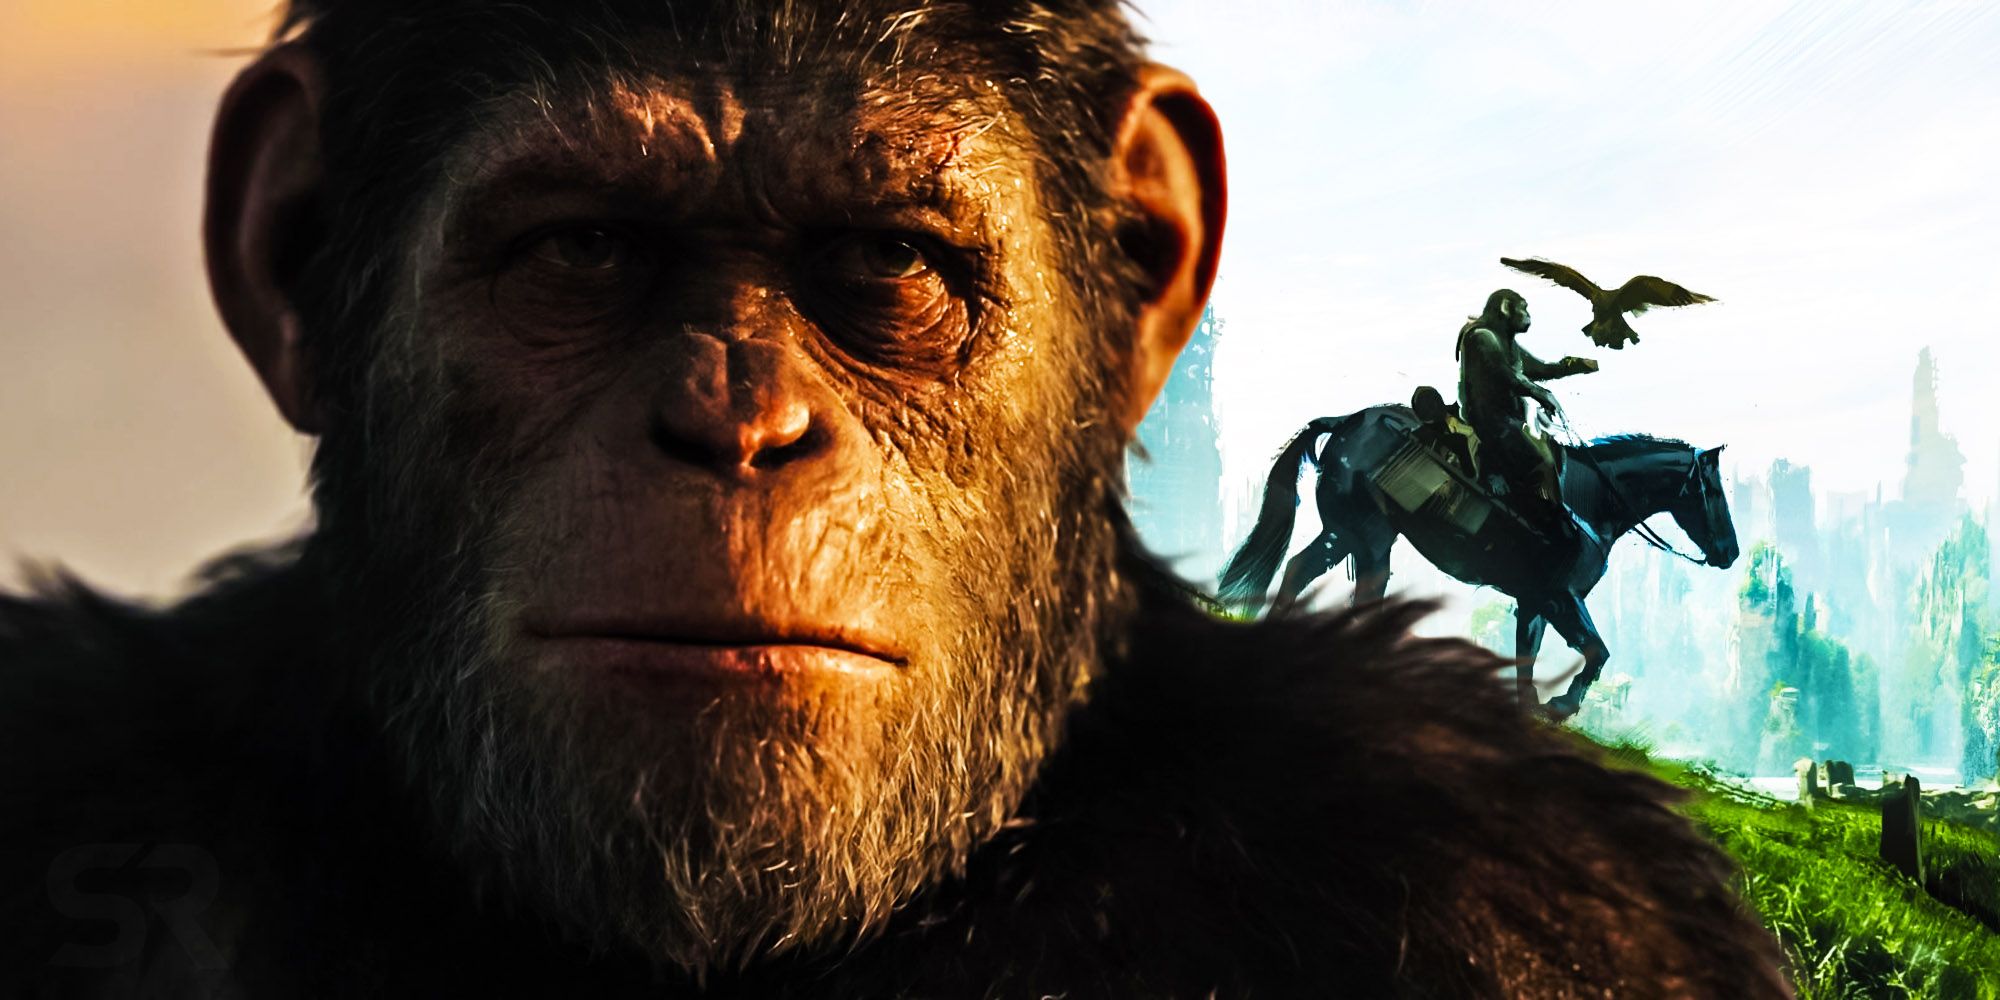 Caesar Kingdom of the planet of the apes